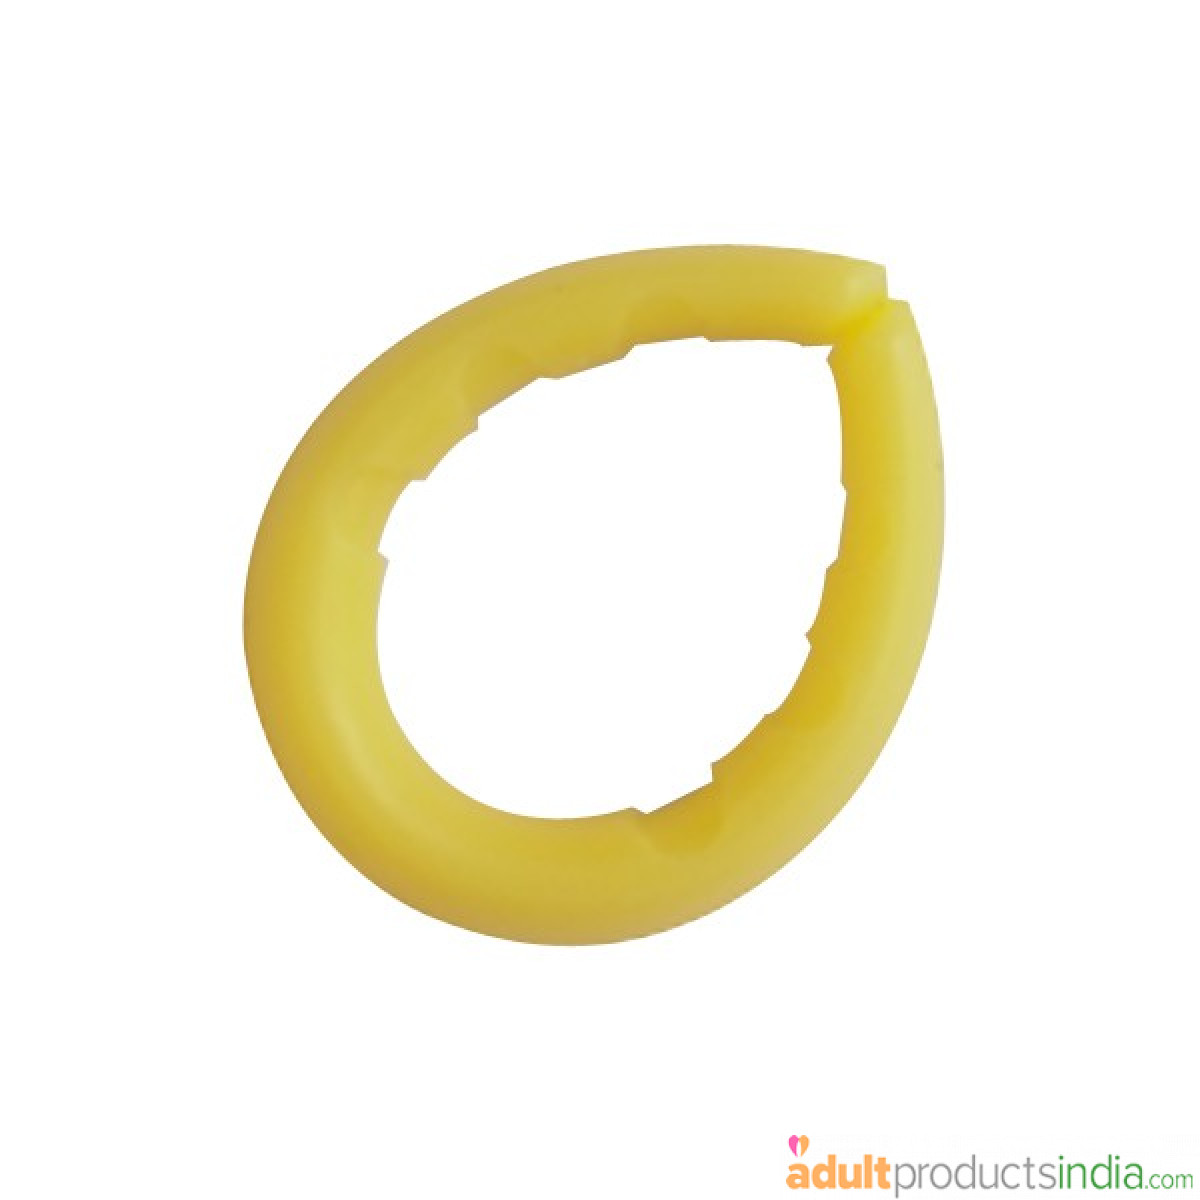 Prepuce Cock Ring - Small Size